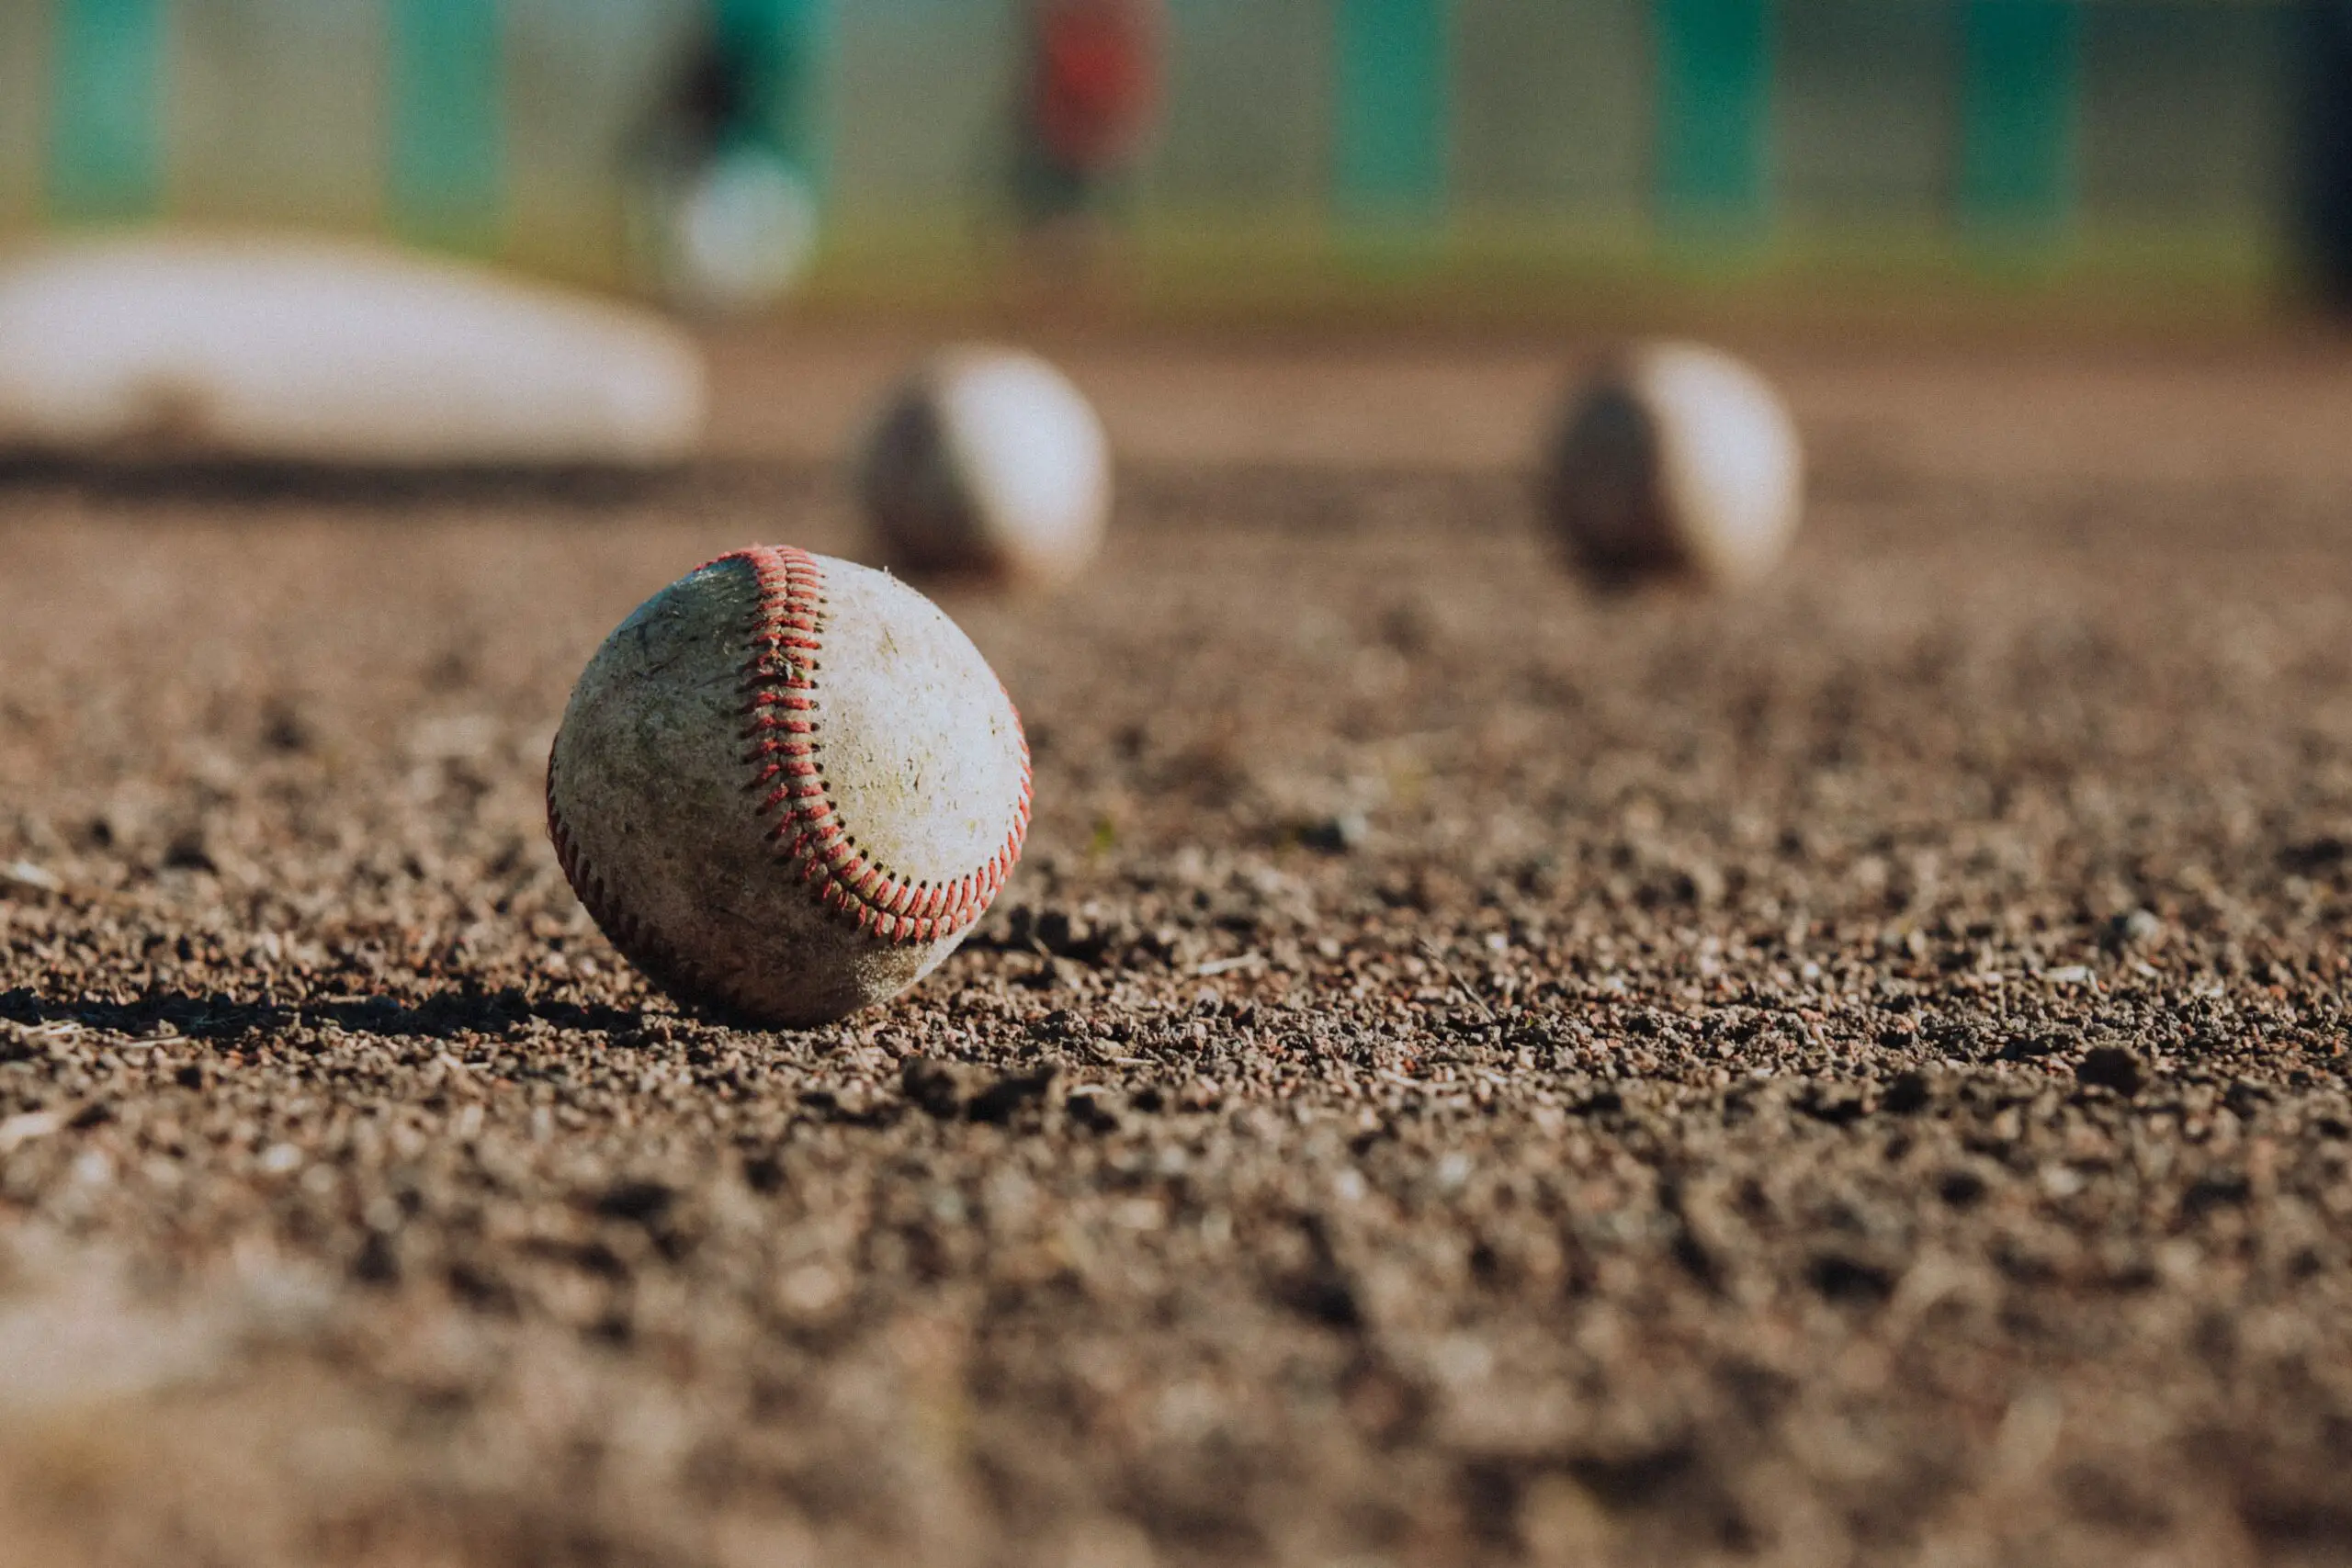 A Complete Guide On How To Play Baseball For Beginners?